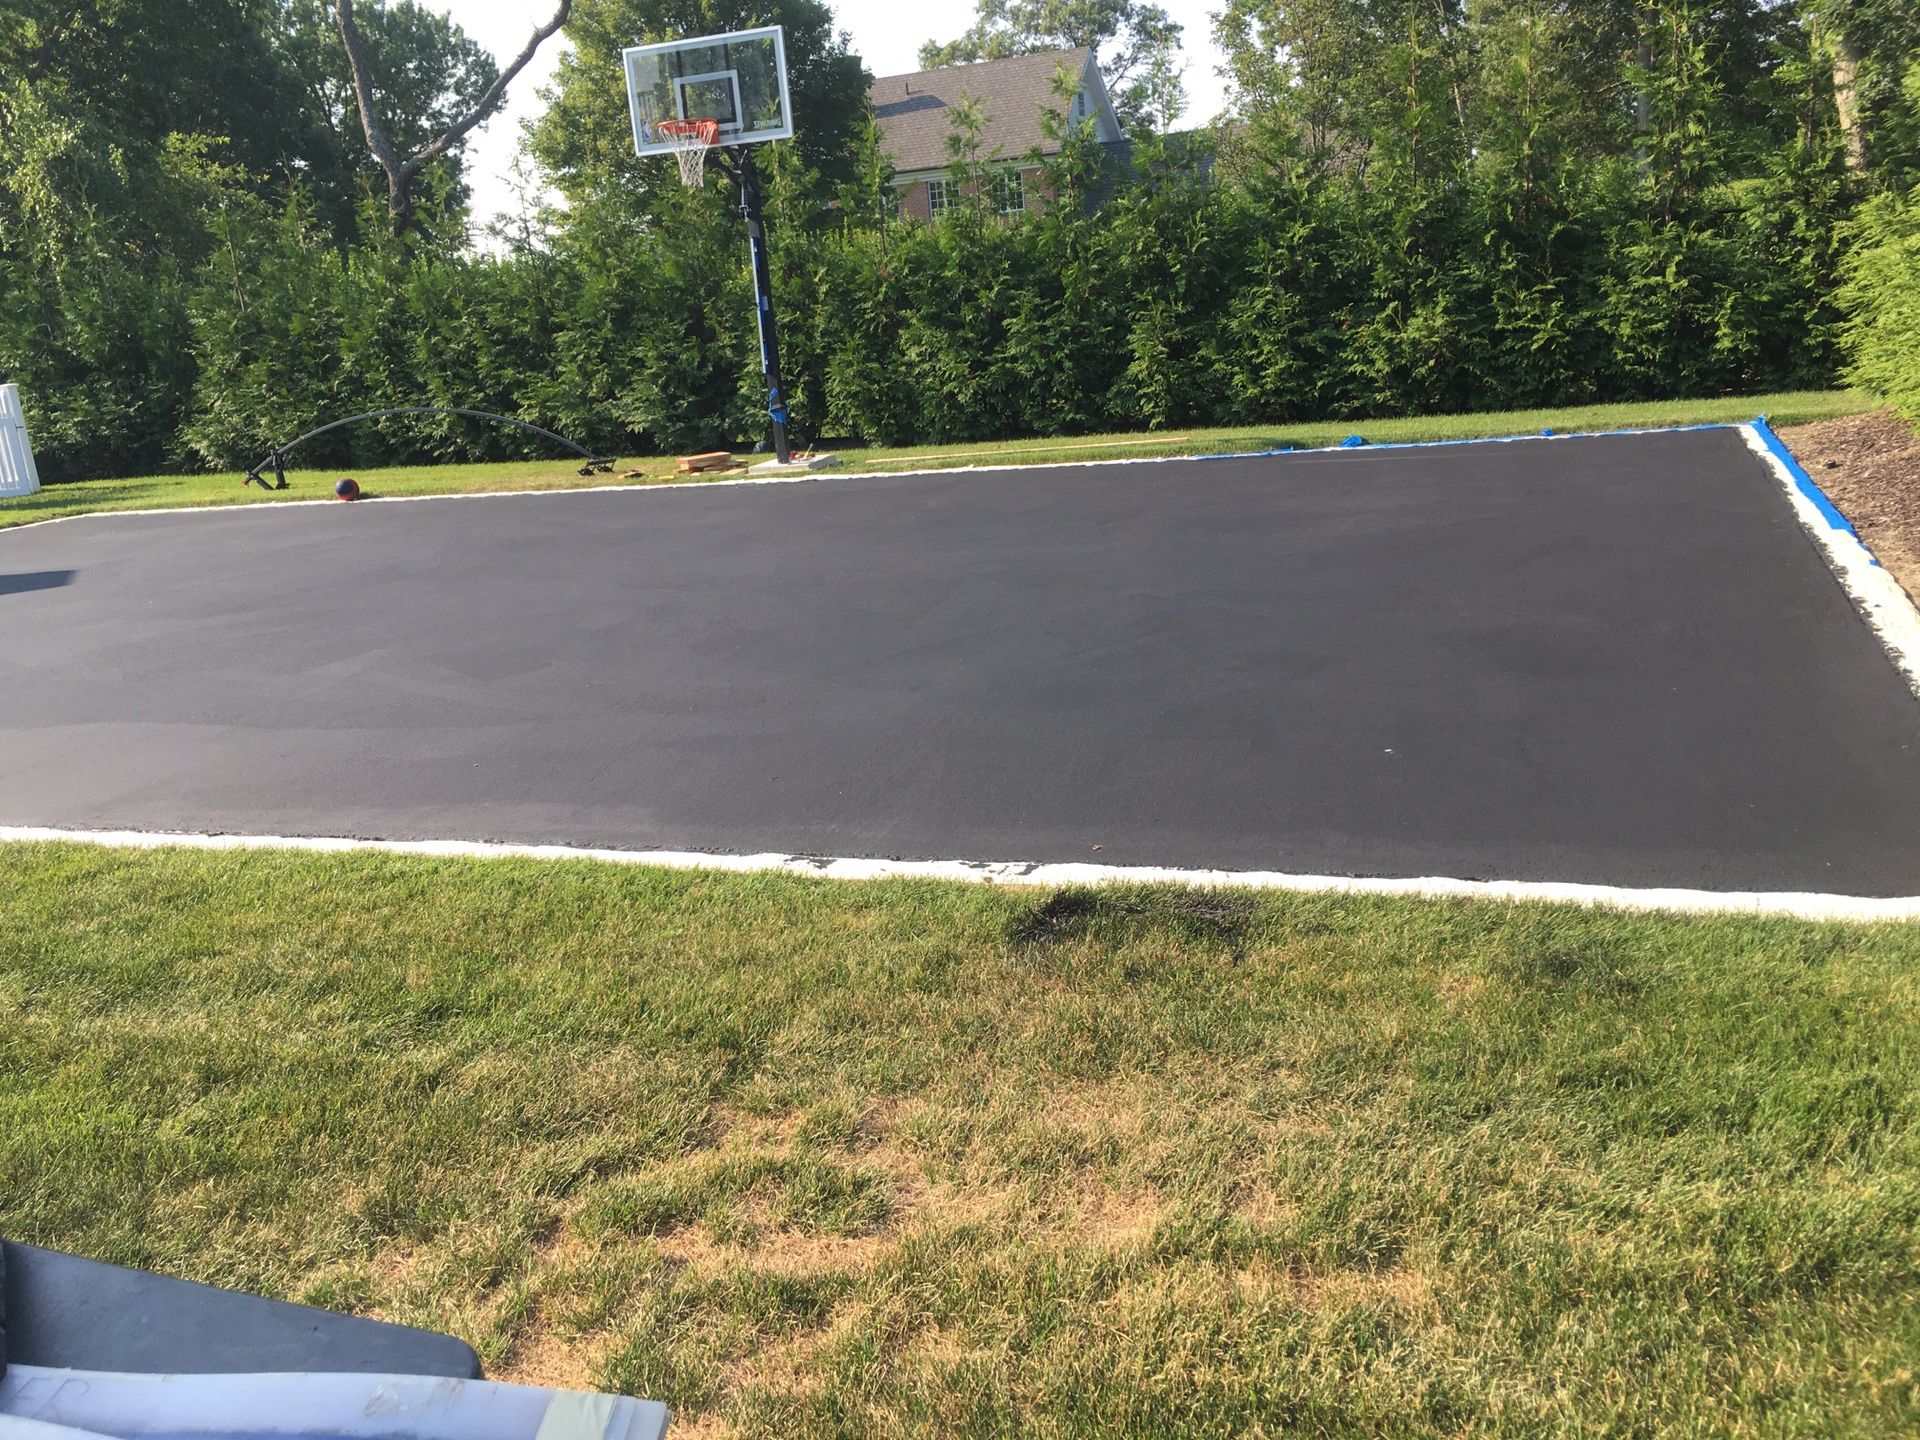 Before and after drive way painting tar basketball courts etc setting up hoops